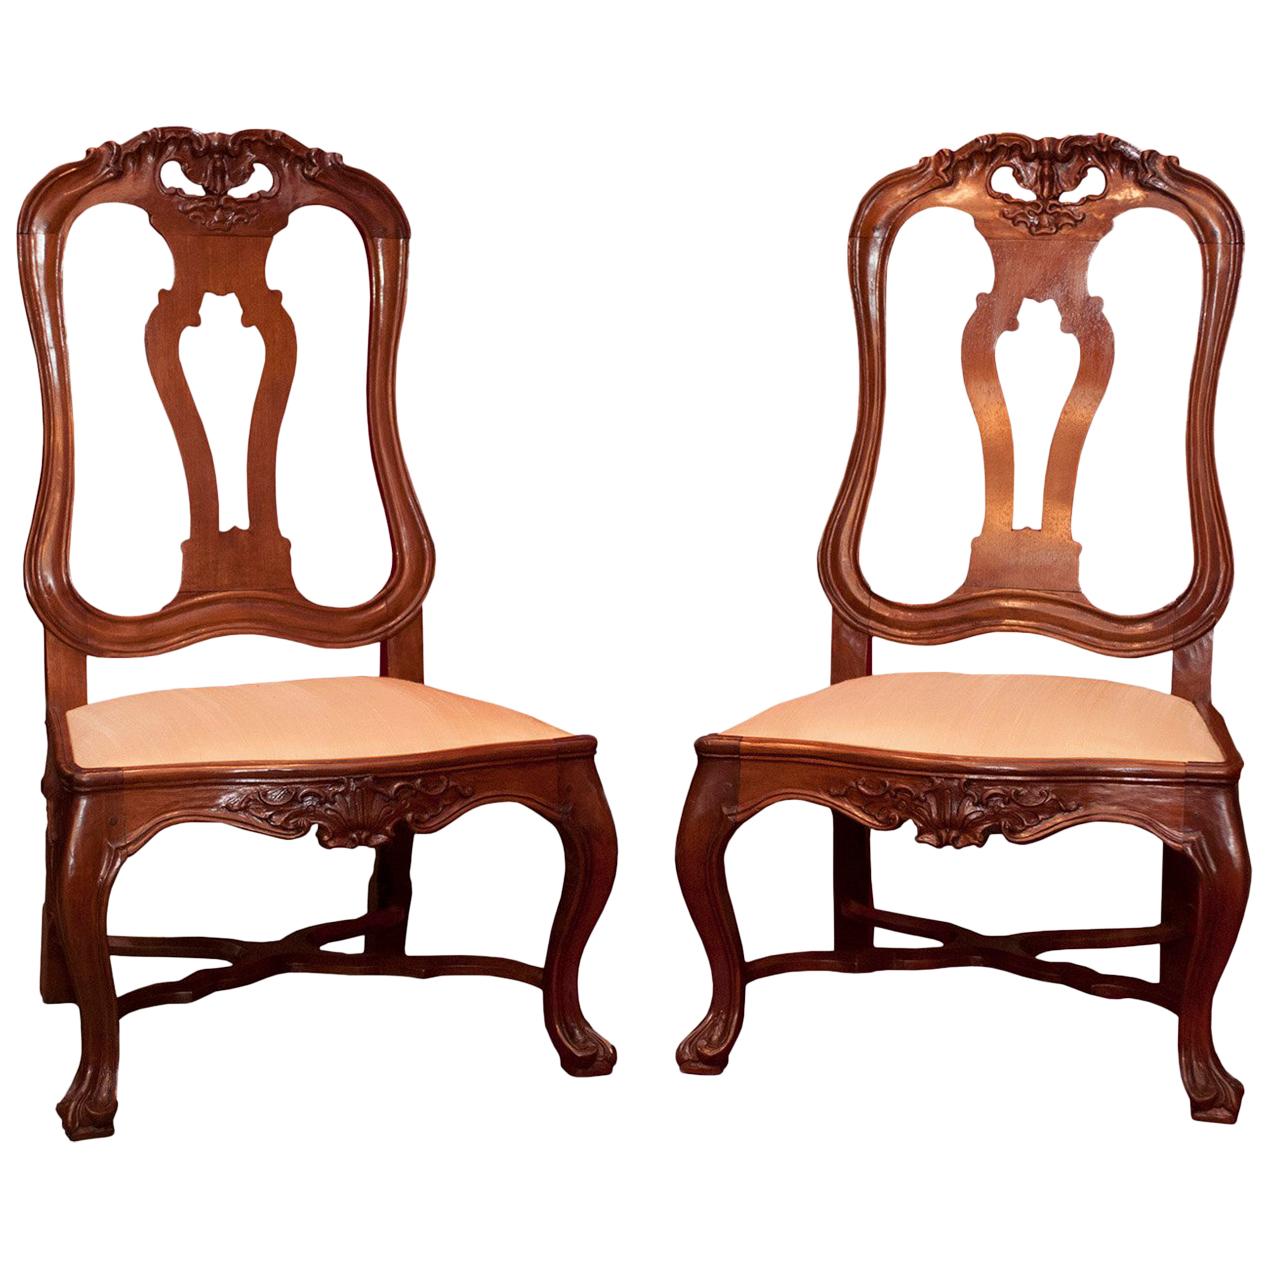 18th Century Portuguese Chairs For Sale